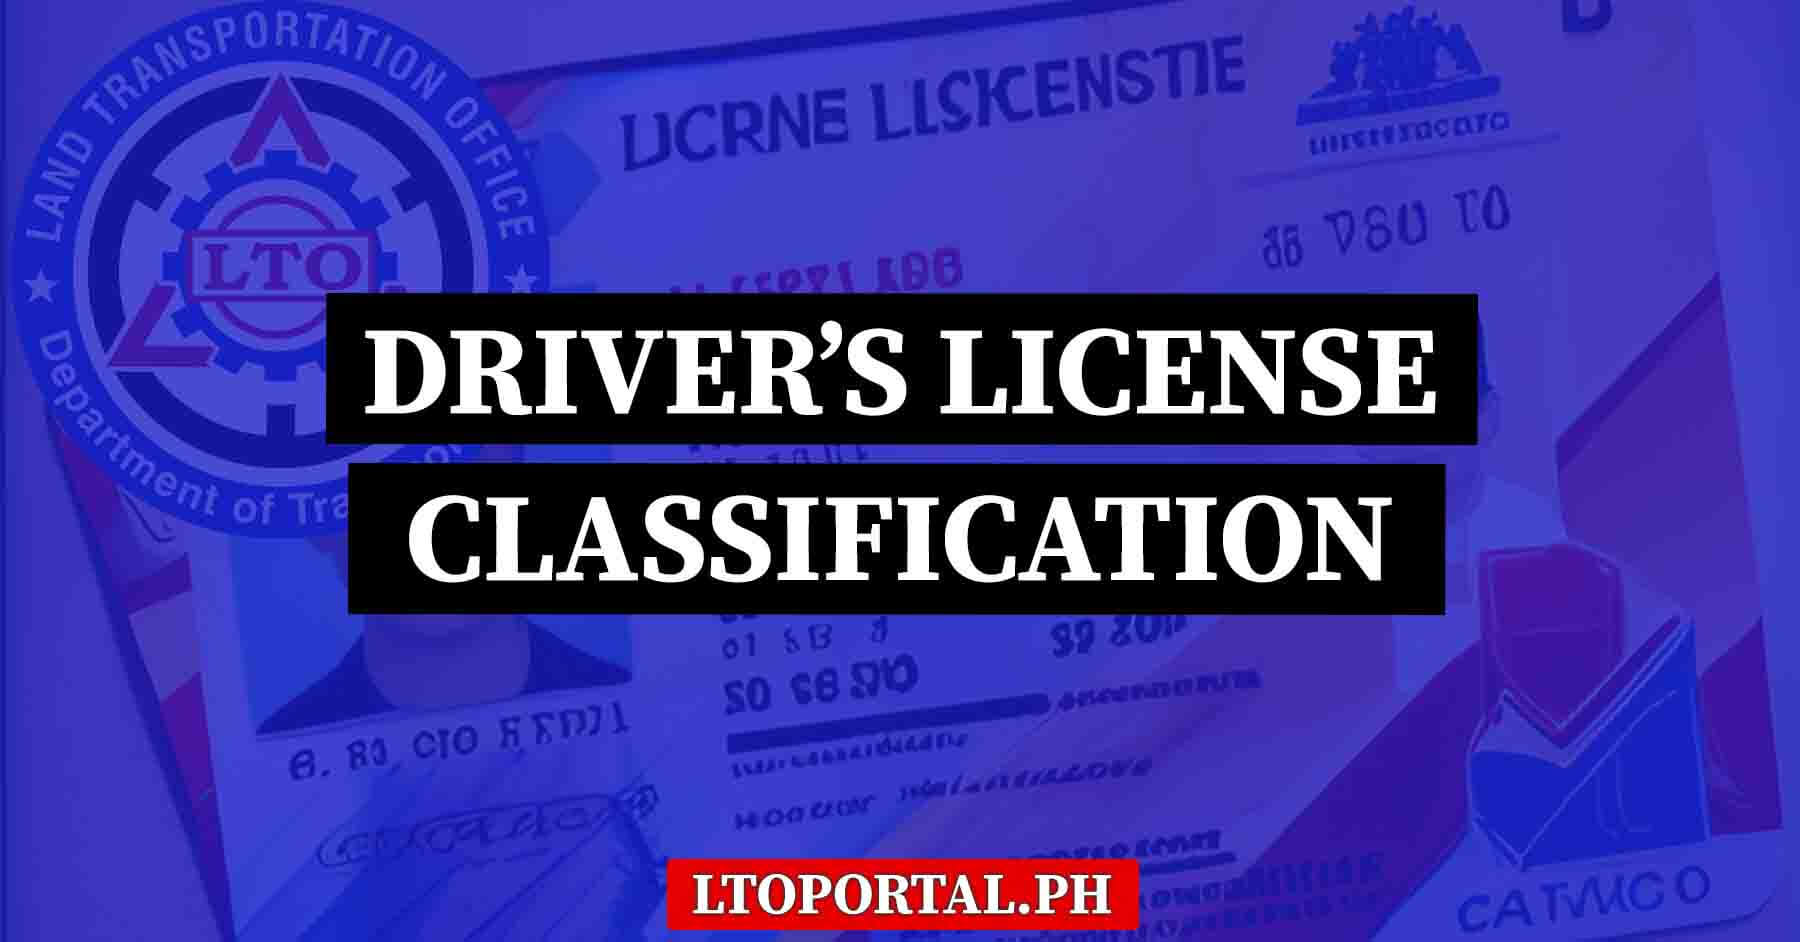 can you use a photocopy of driver's license